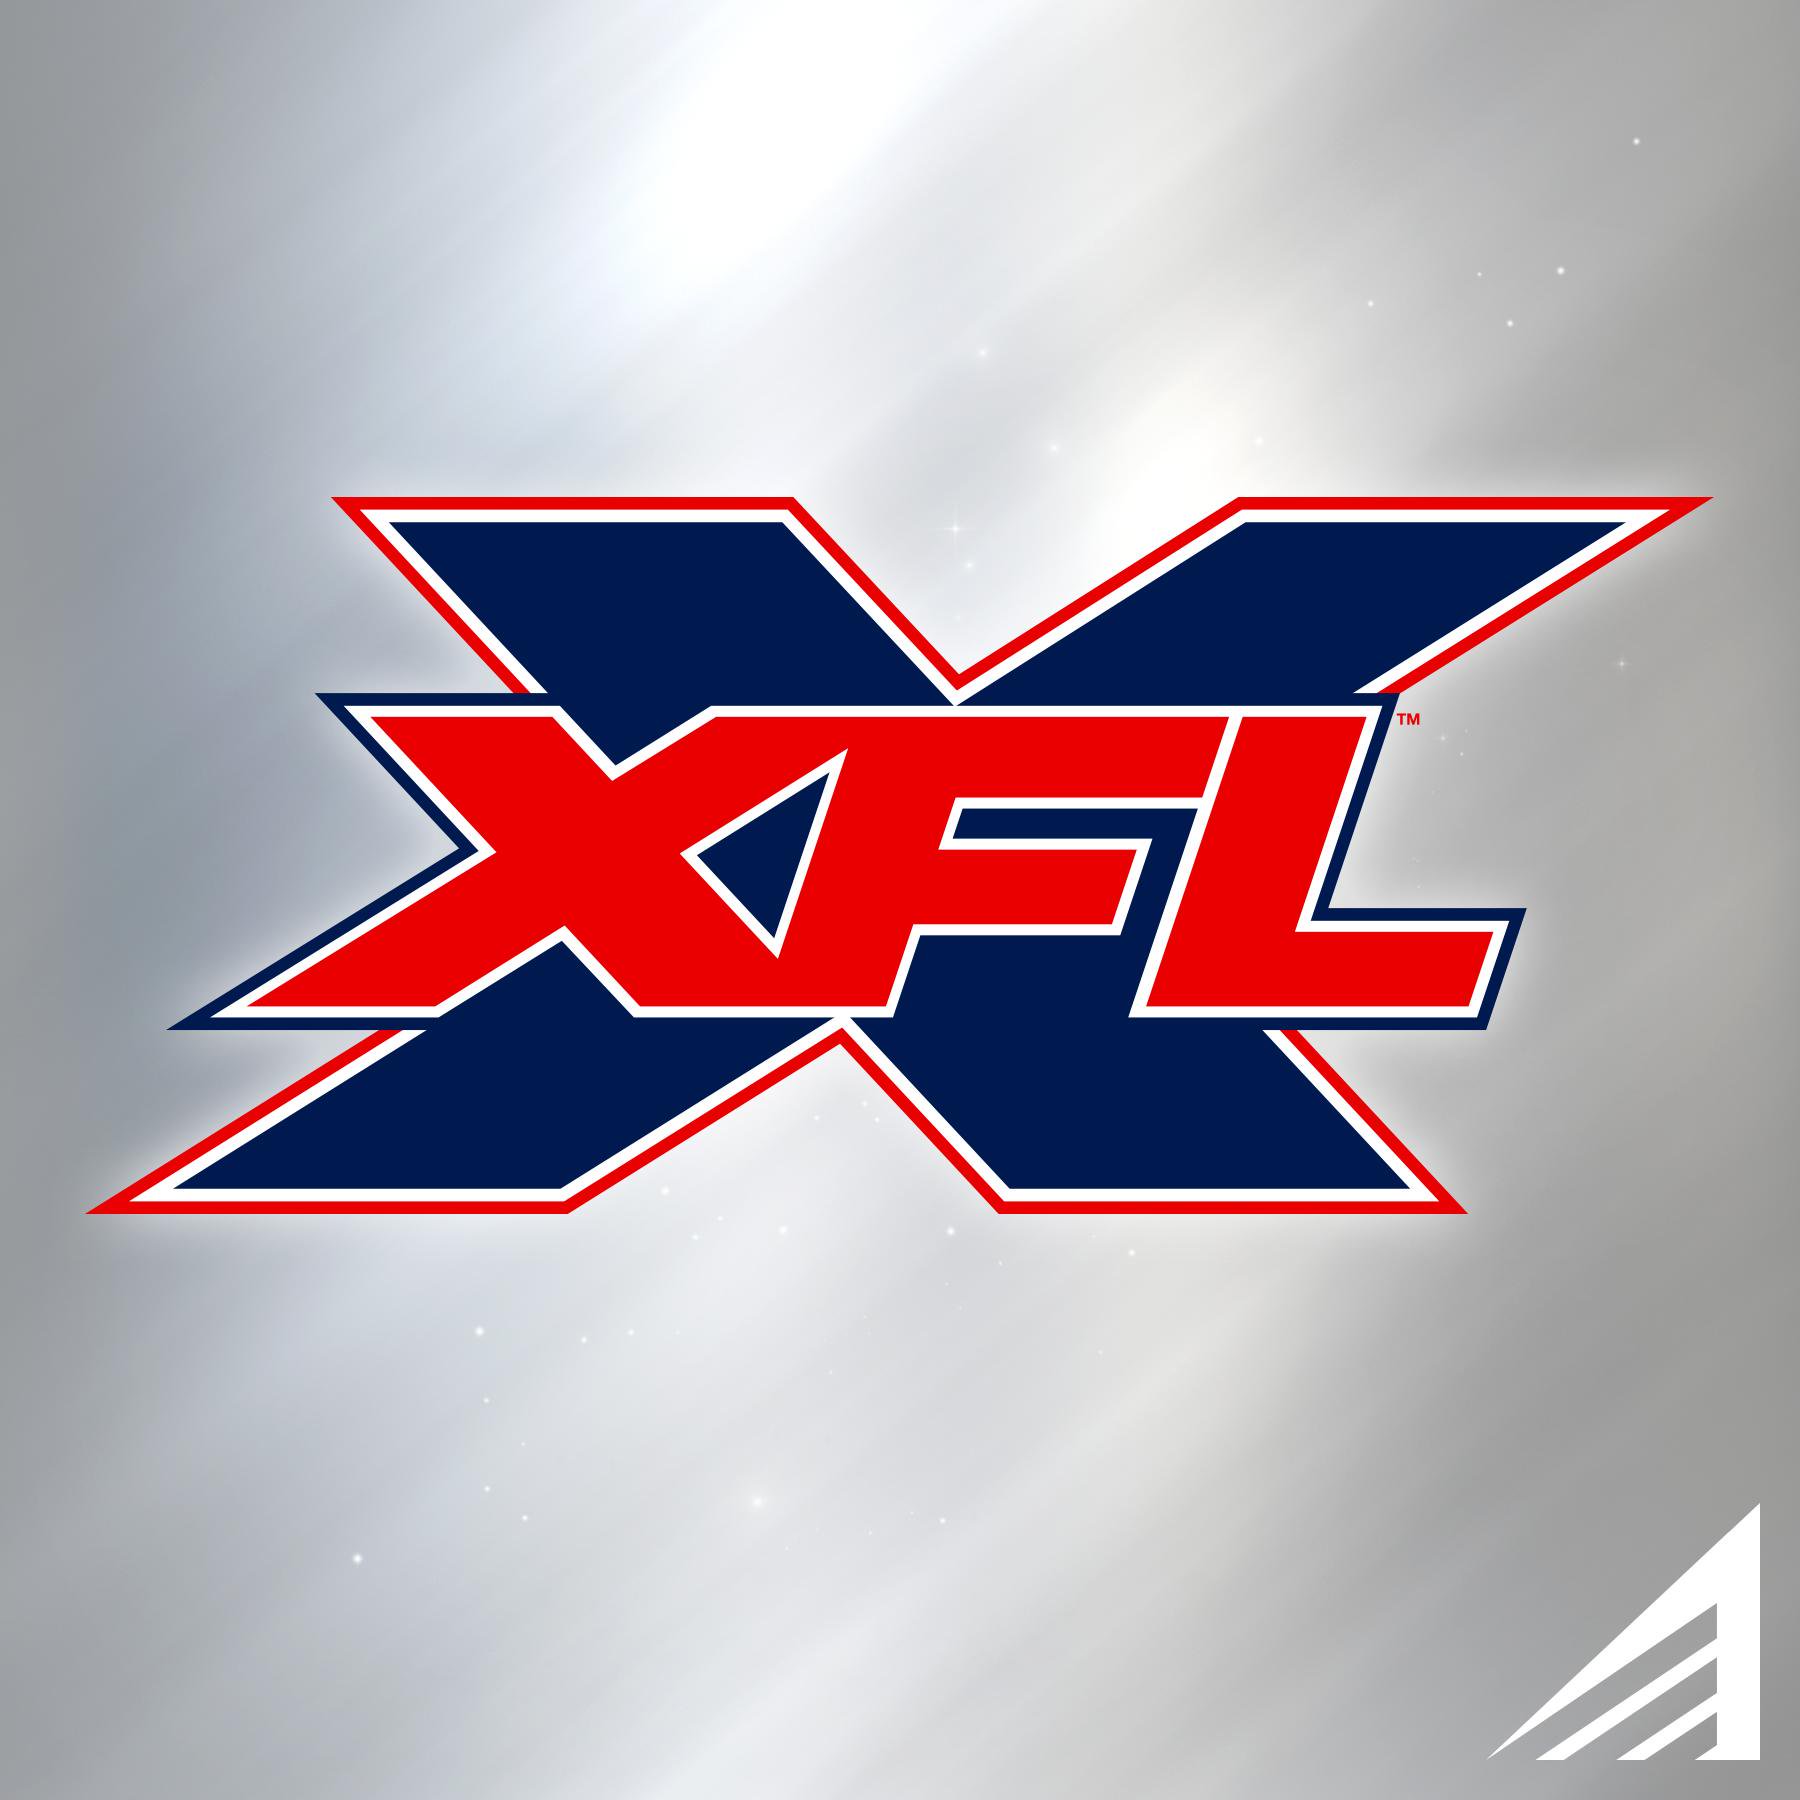 The XFL Is Getting Direct Competition From Alliance Of American Football